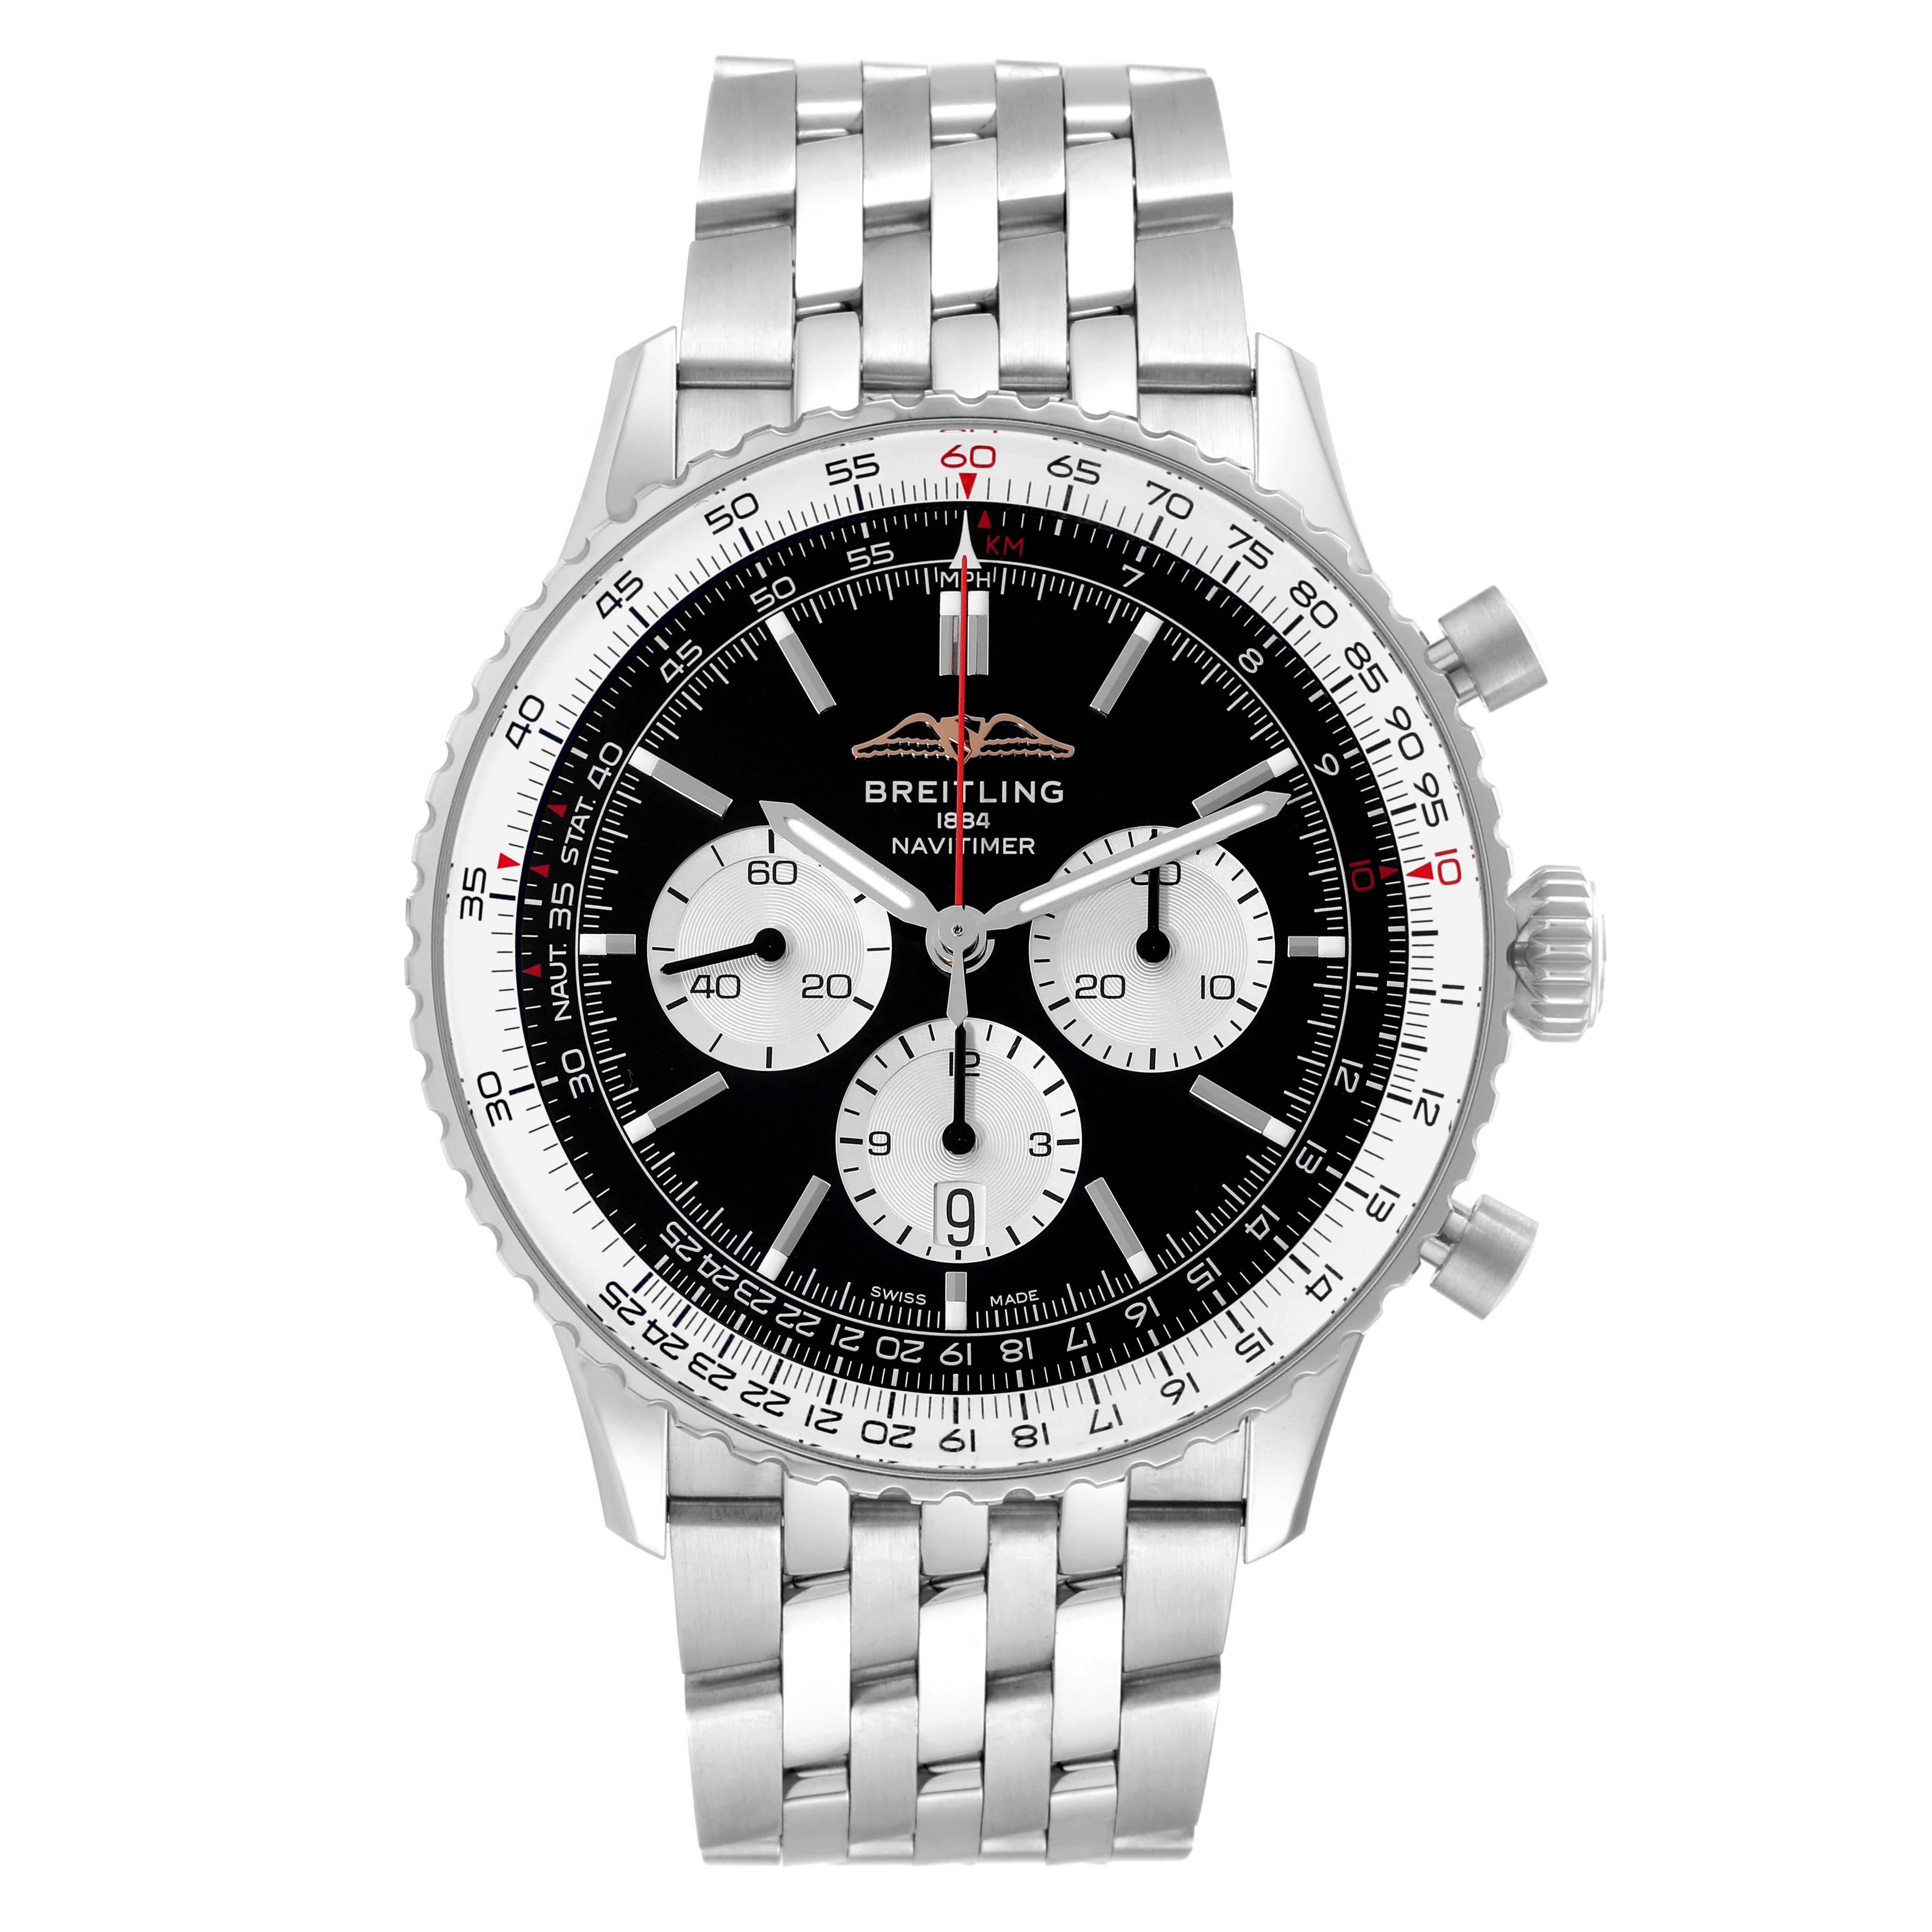 Breitling Navitimer 01 Black Dial Steel Mens Watch AB0137 Box Card. Self-winding automatic officially certified chronometer movement. Chronograph function. Stainless steel case 46 mm in diameter. Case thickness 13.9 mm. Transparent exhibition